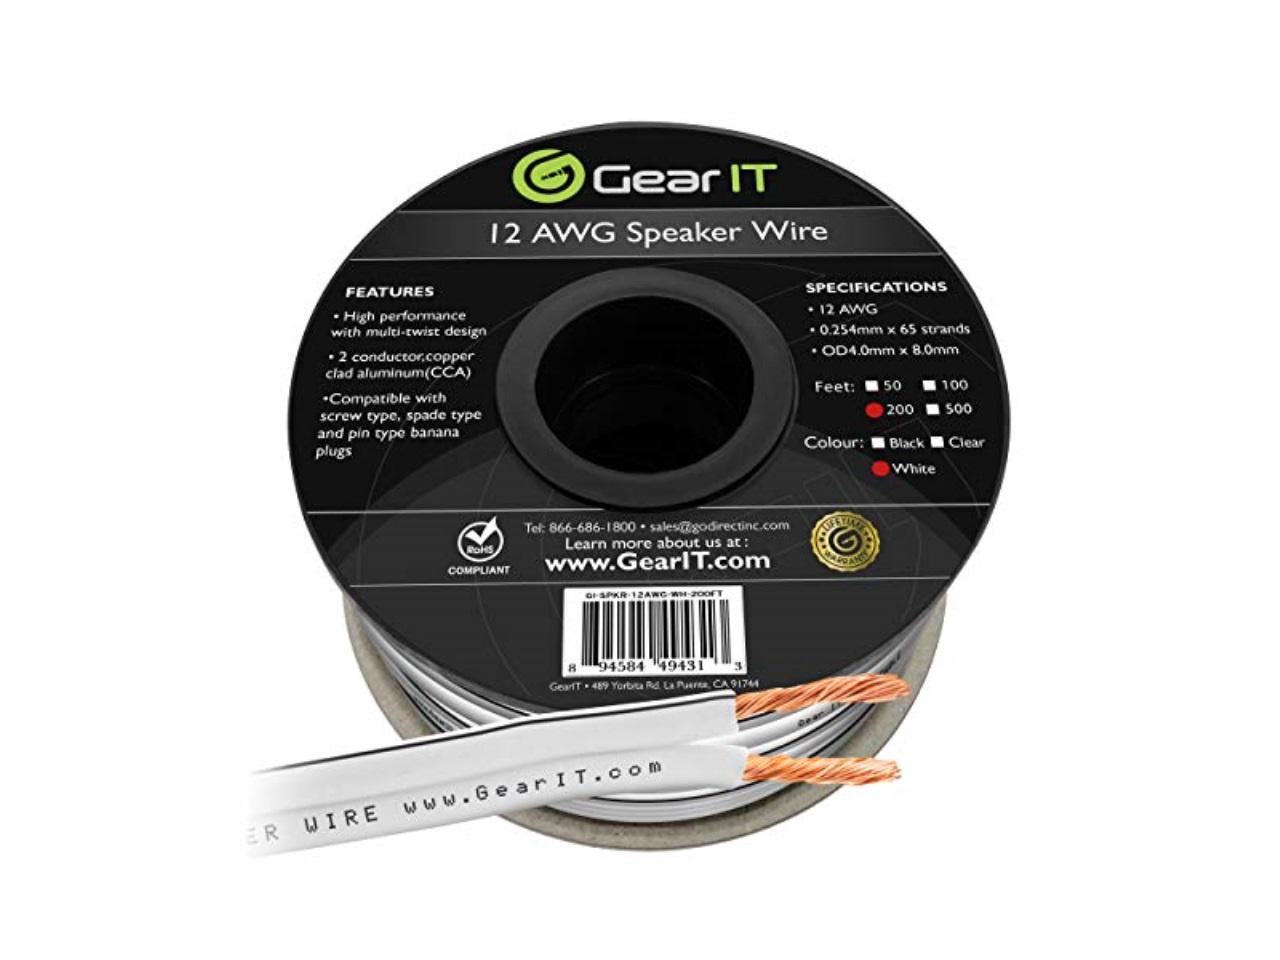 White 12AWG Speaker Wire Great Use for Home Theater Speakers and Car Speakers 200 Feet / 60.96 Meters GearIT Pro Series 12 Gauge Speaker Wire Cable